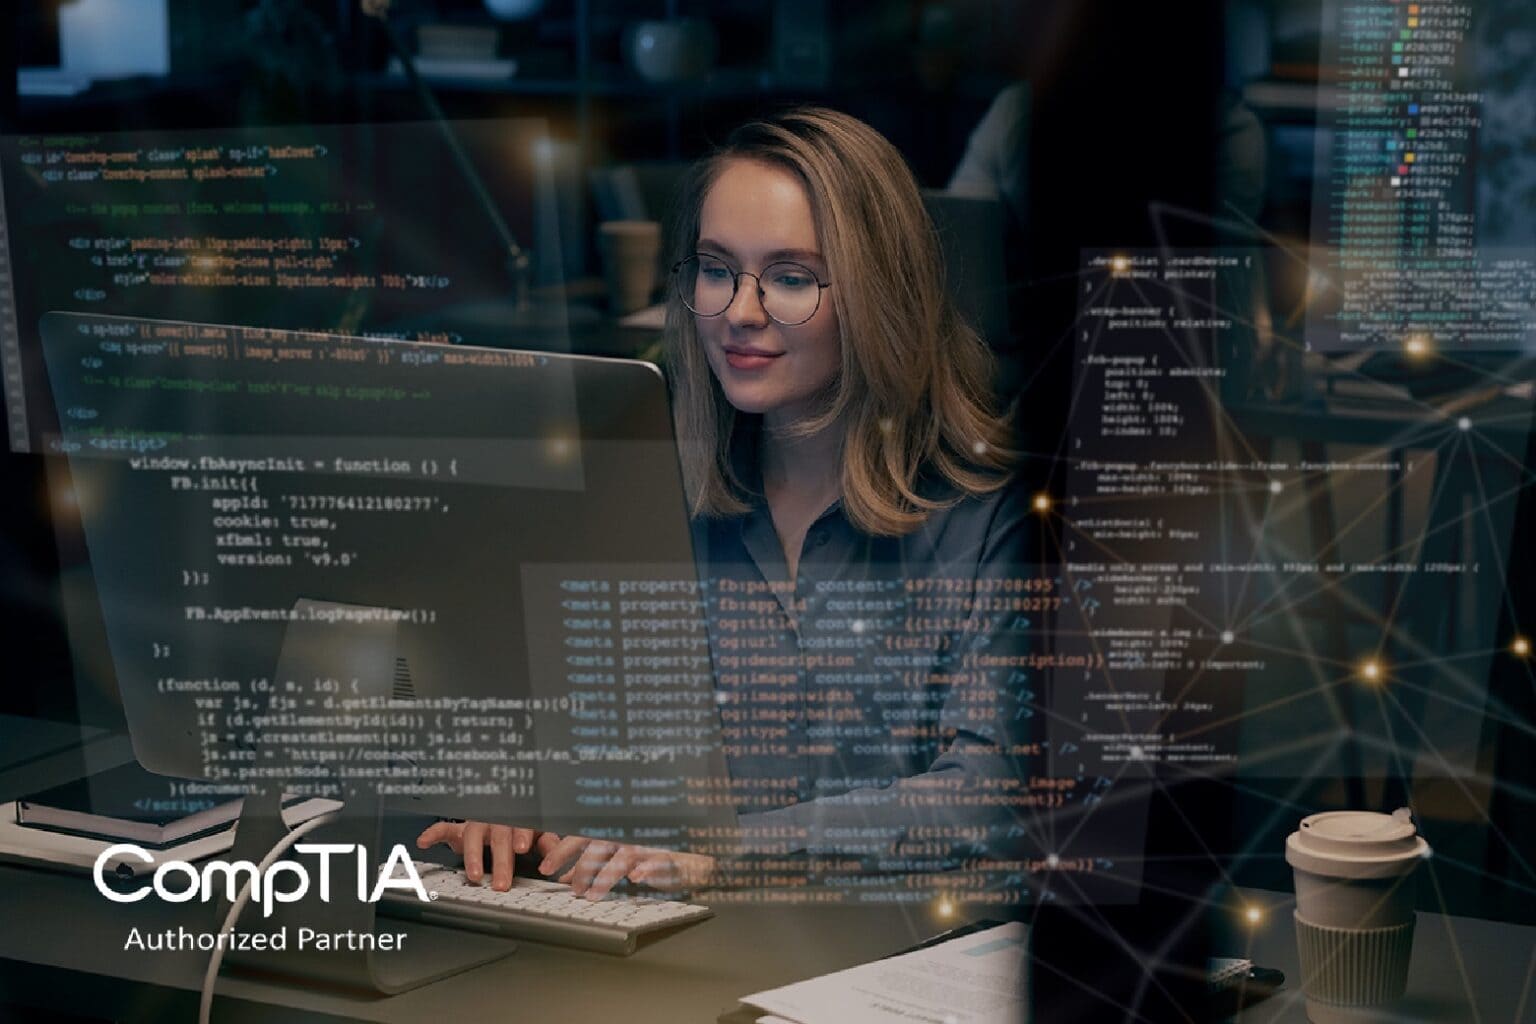 This CompTIA course bundle is only $50 through October 15th.